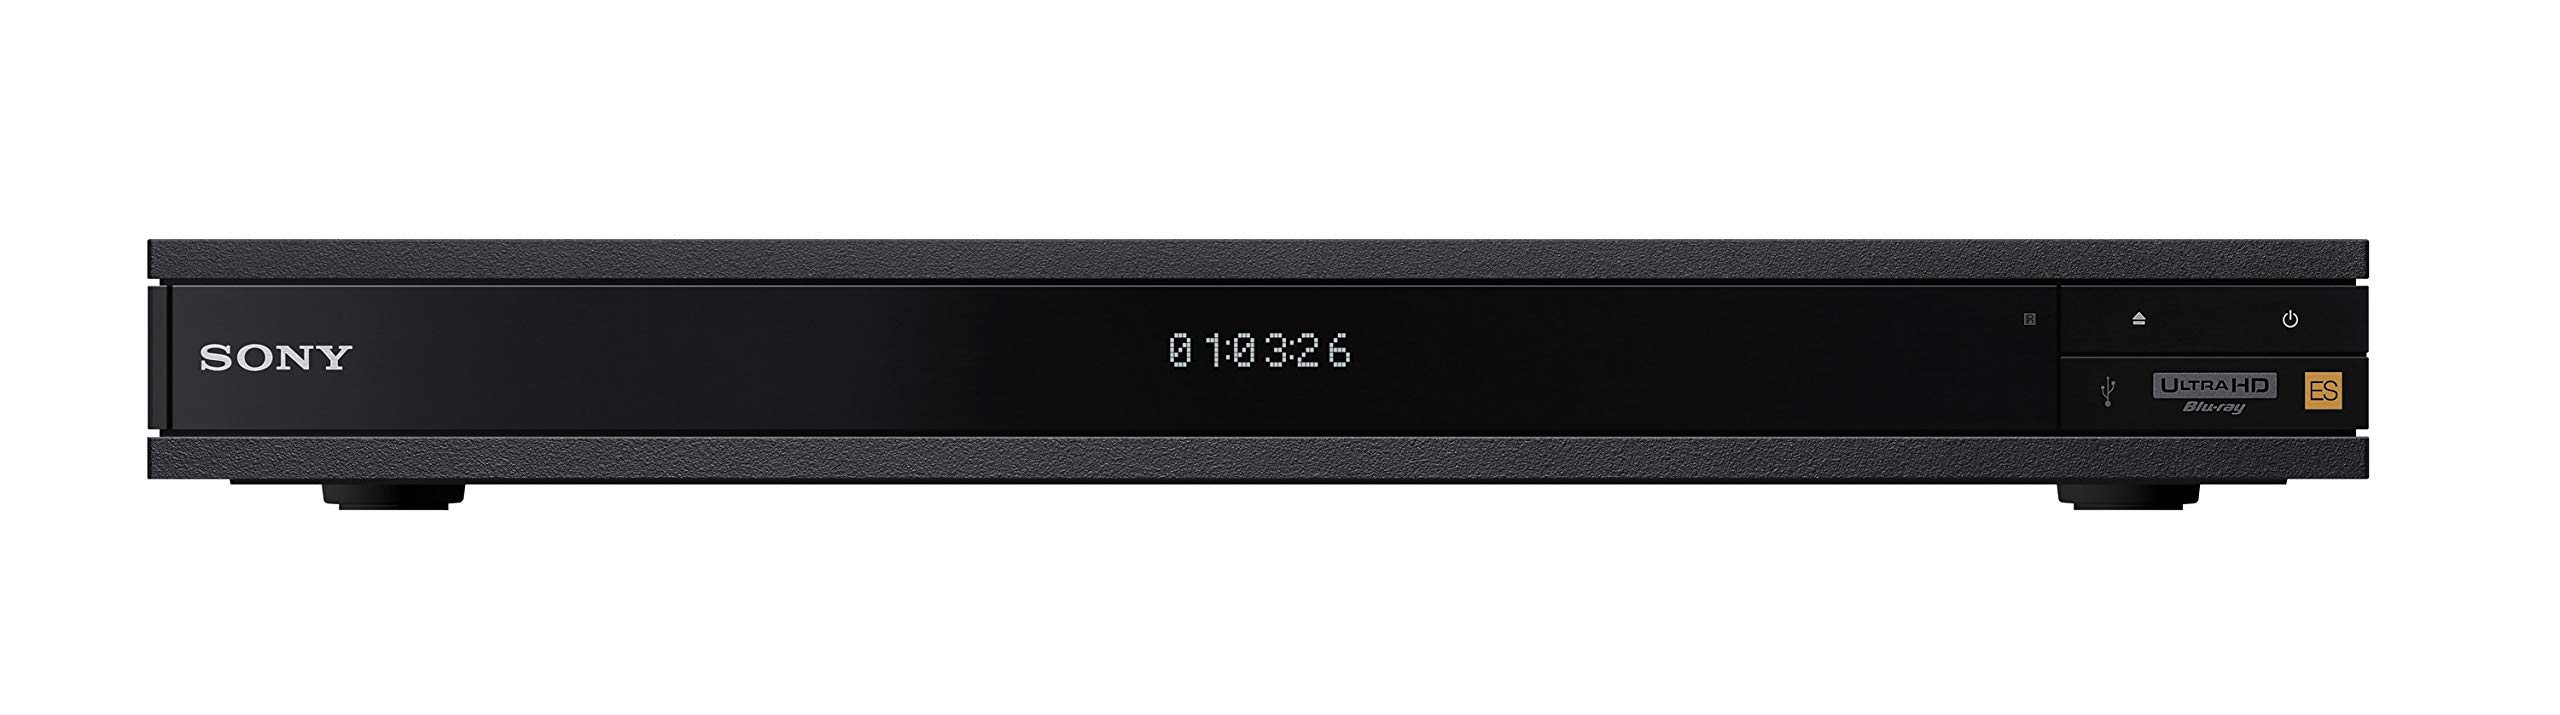 Sony UBP-X1100ES 4K UHD Home Theater Streaming Blu-ray Player with HDR